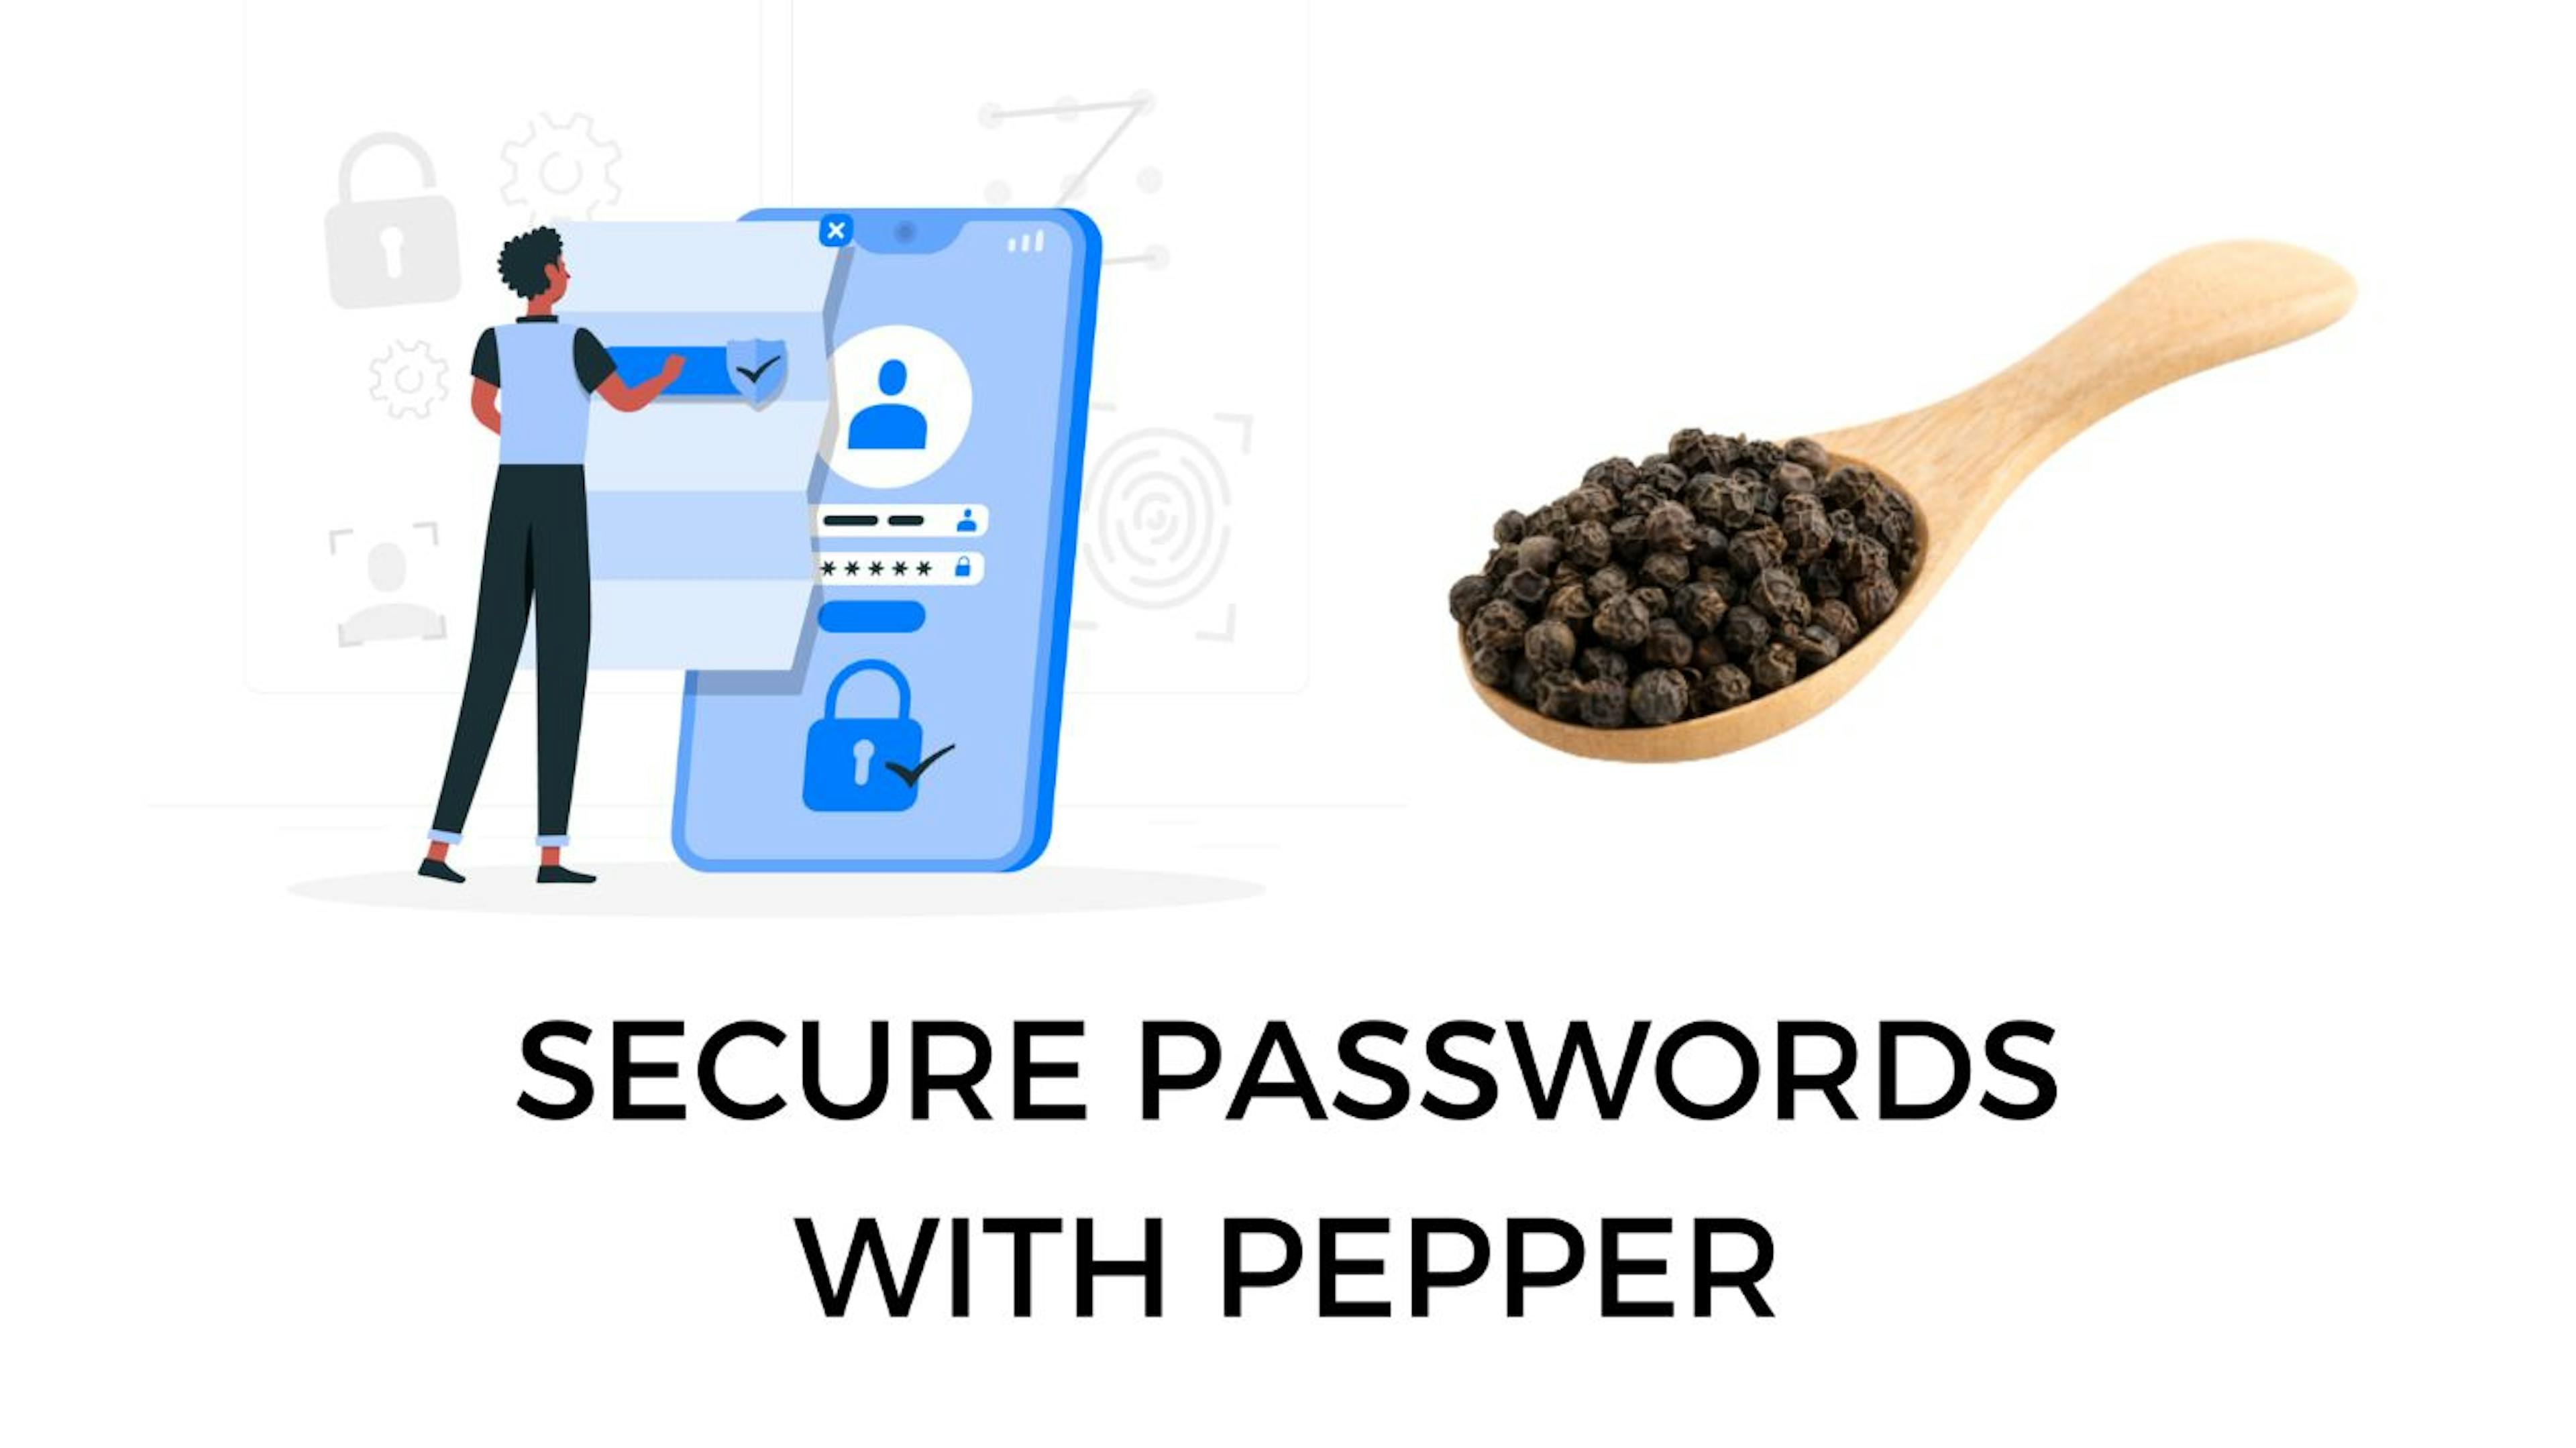 featured image - How You Can Use Pepper to Further Secure Encrypted Passwords